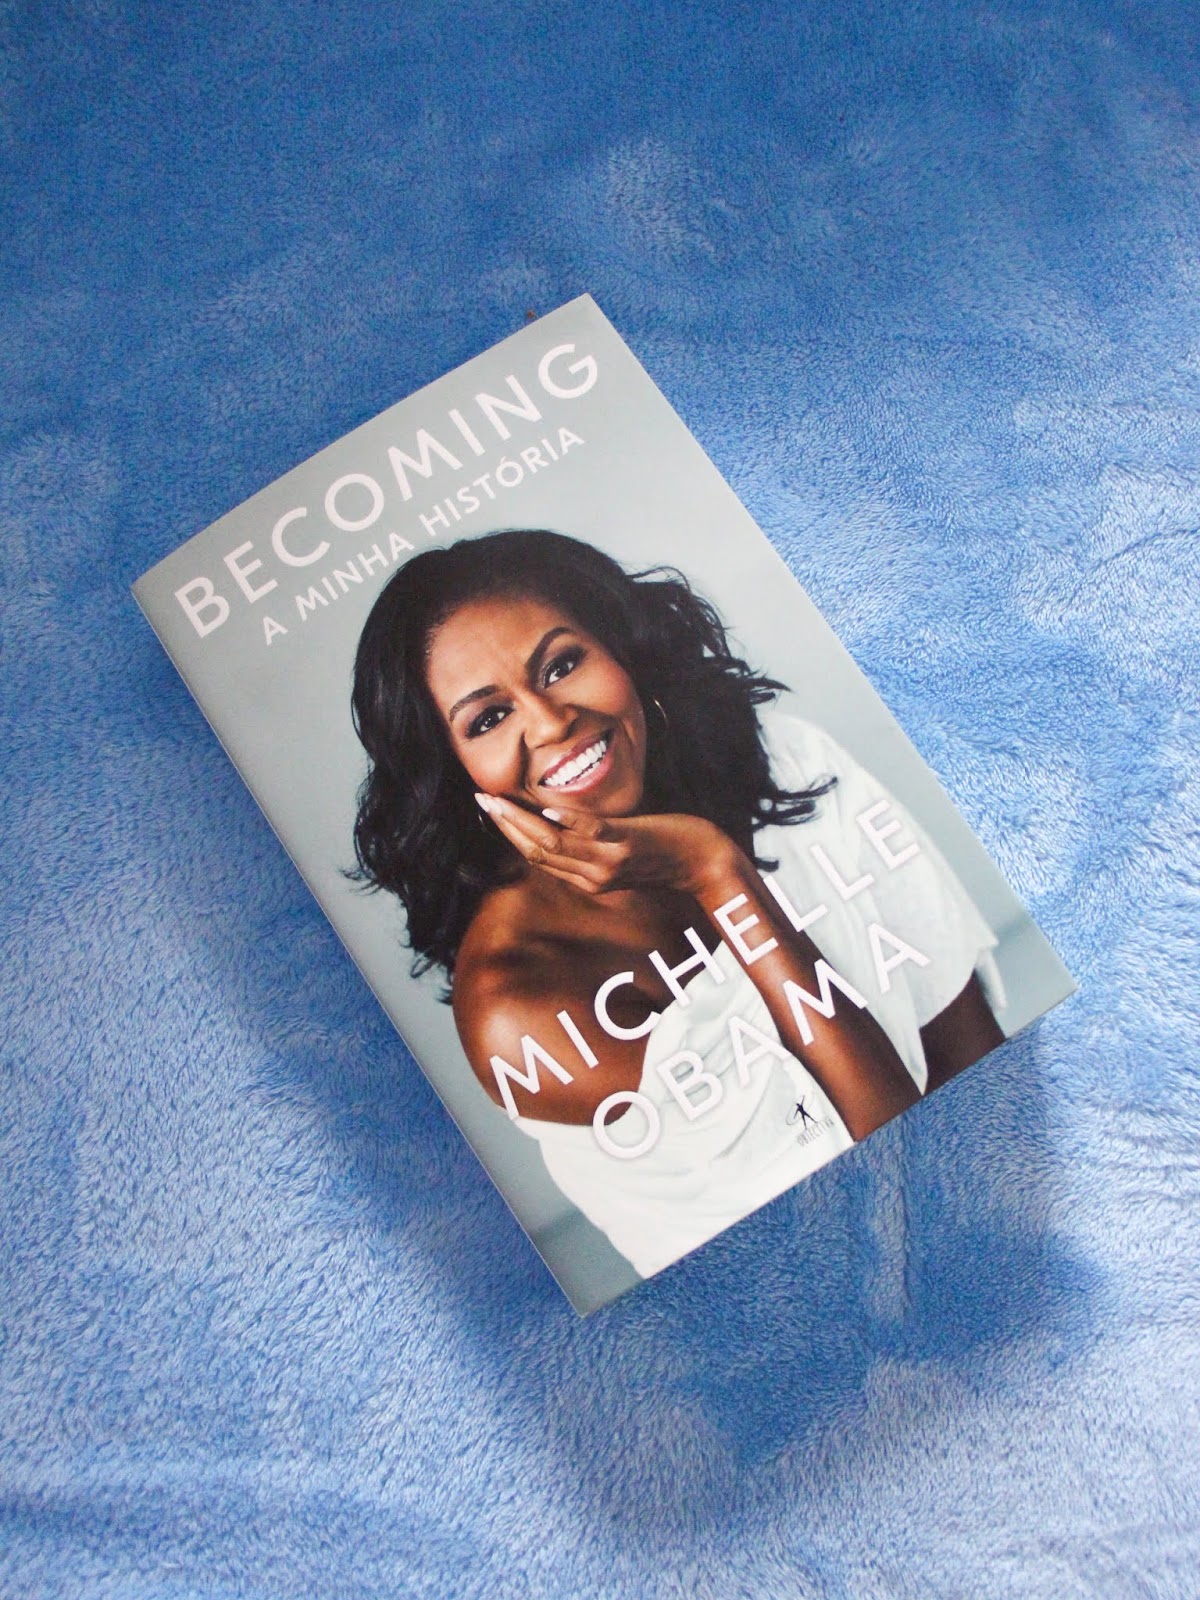 becoming - michelle obama